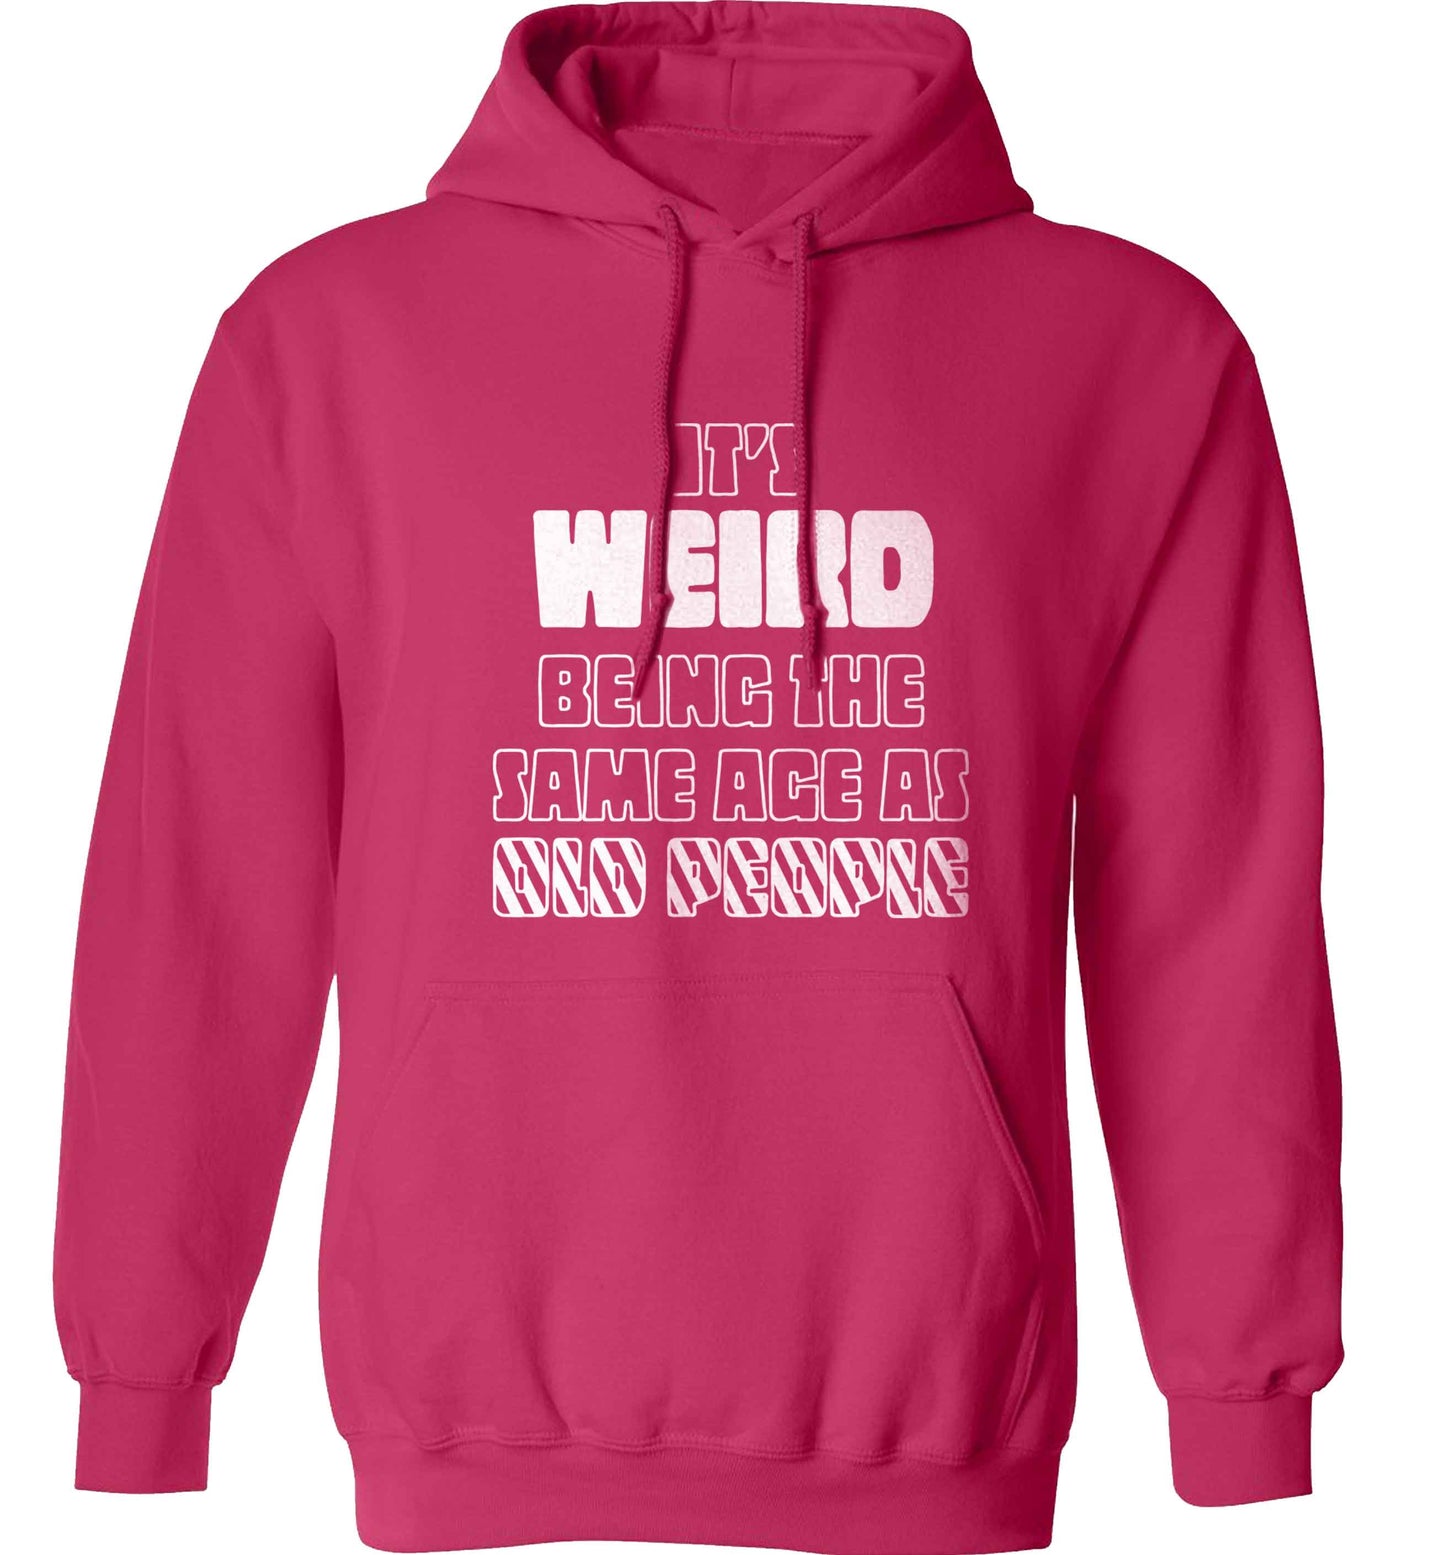 It's weird being the same age as old people adults unisex pink hoodie 2XL